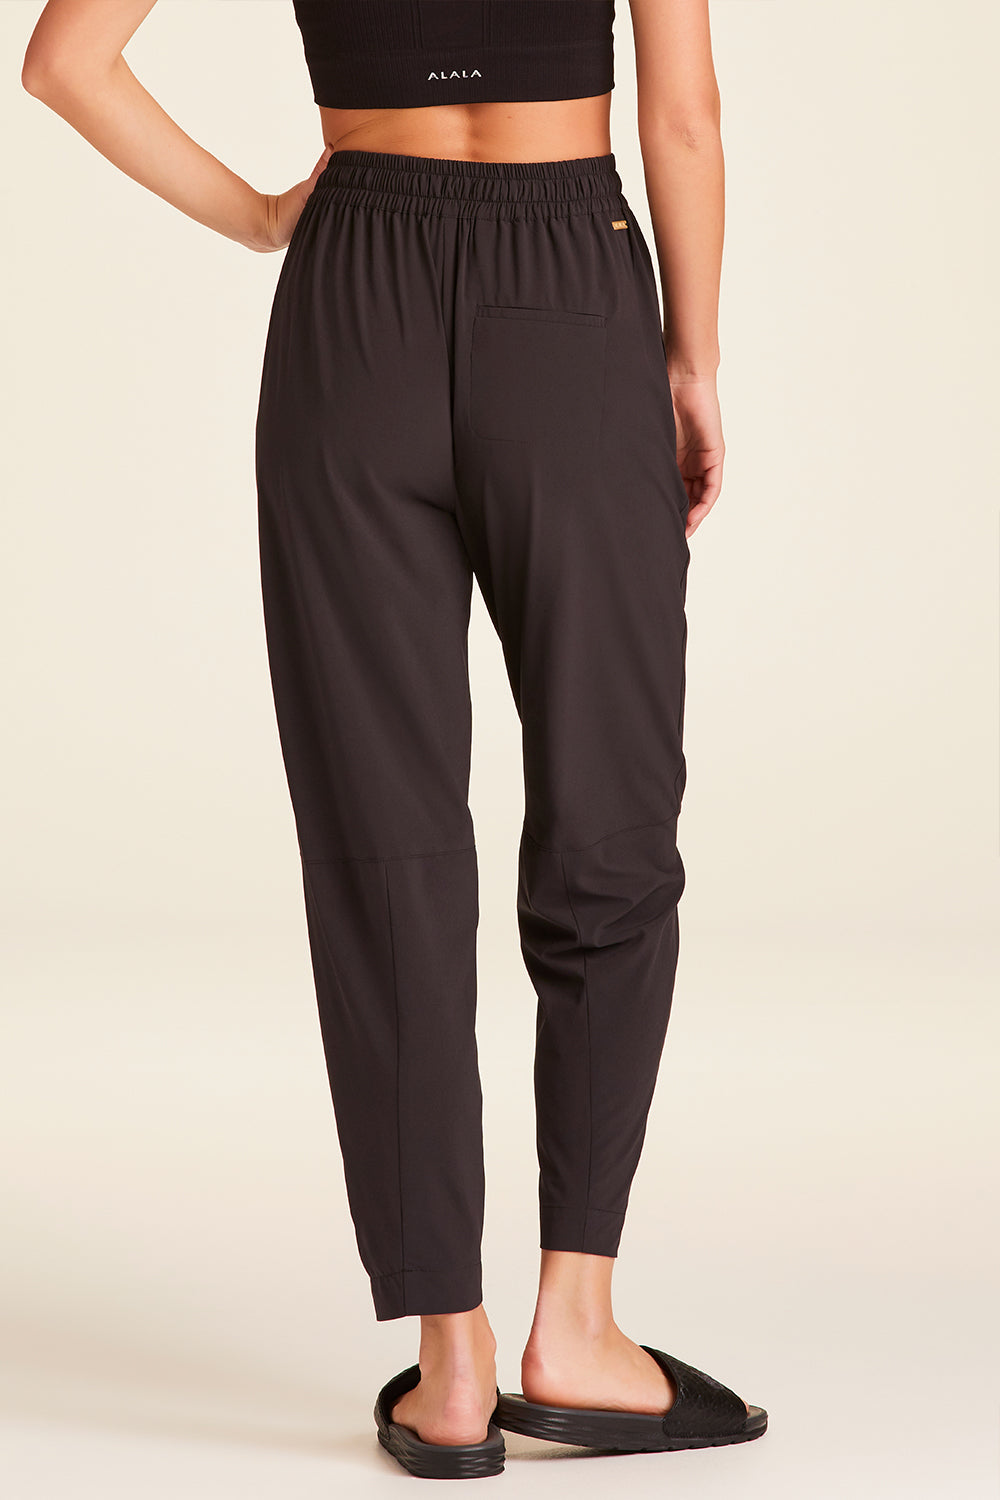 Back view of Alala Luxury Women's Athleisure commuter pant in black